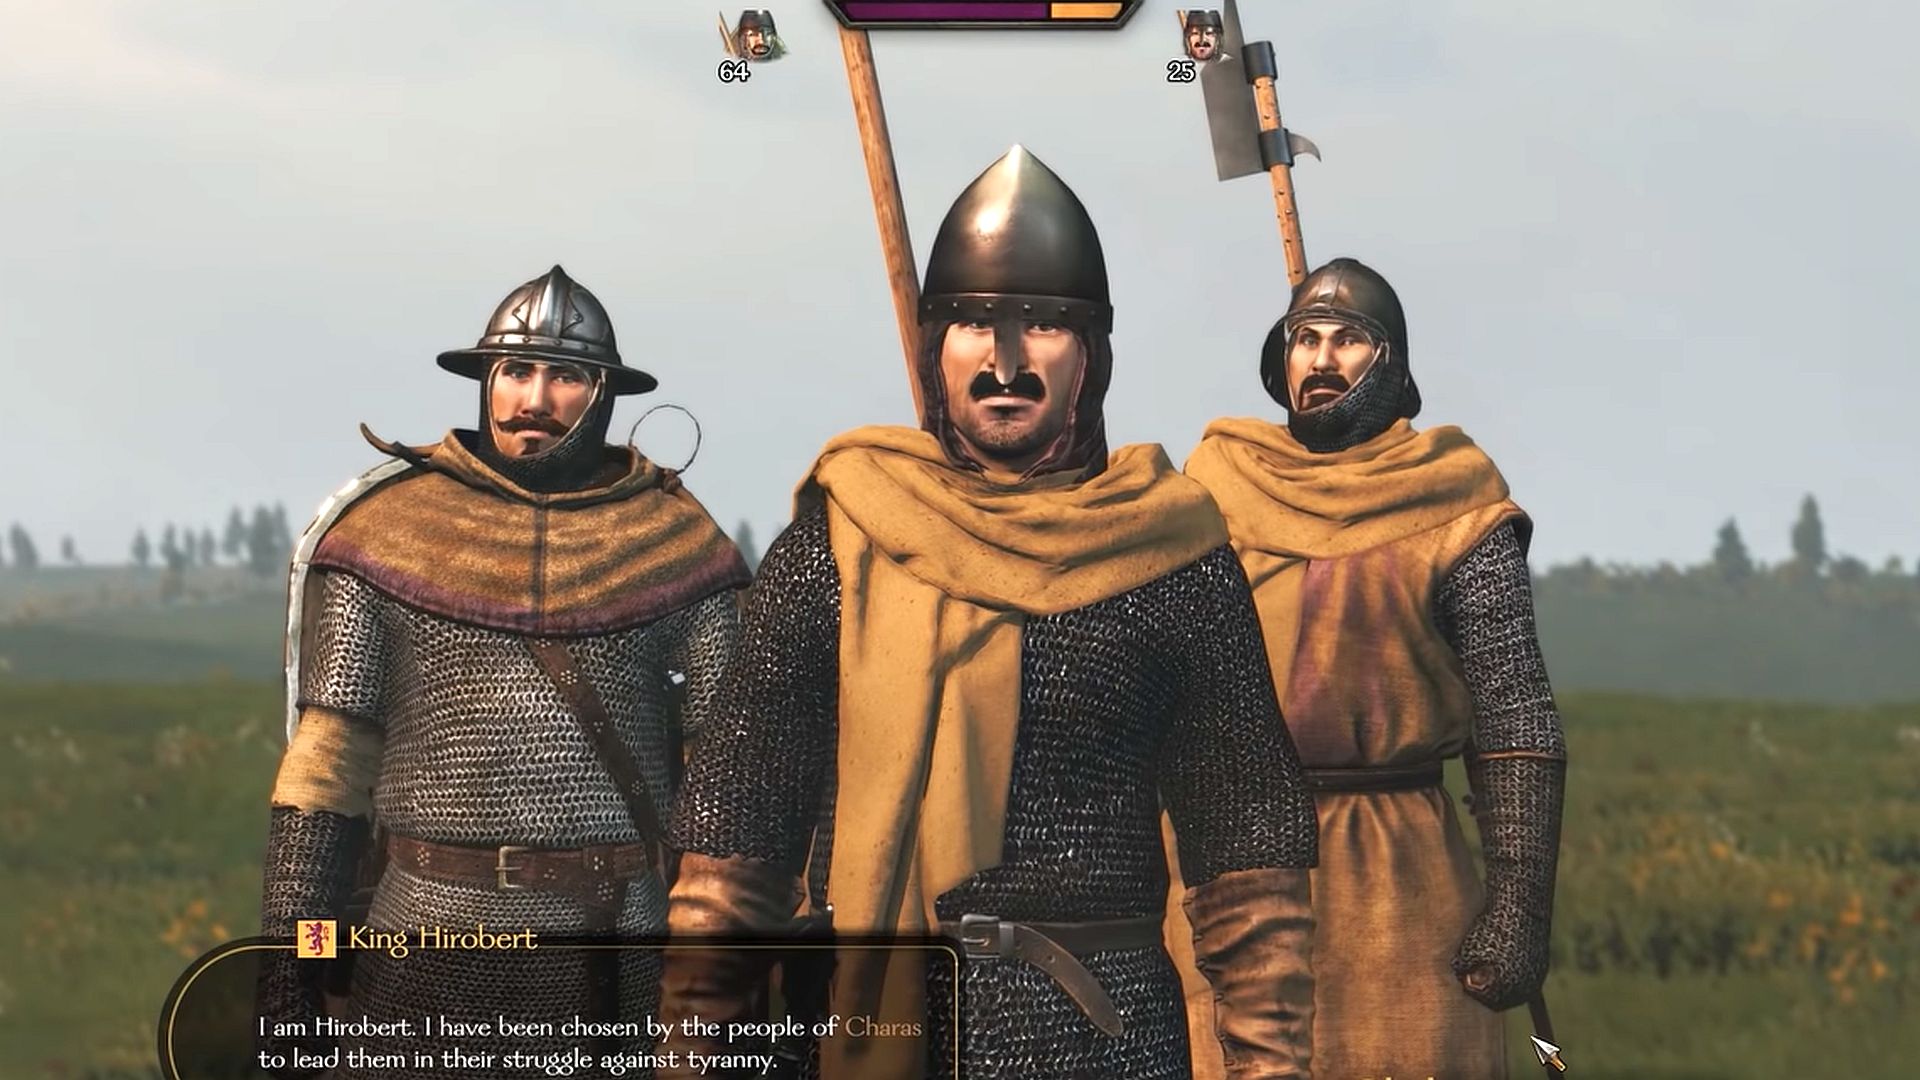 Mount & Blade 2: Bannerlord gets the Rebellion feature that allows unfortunate people to stand up